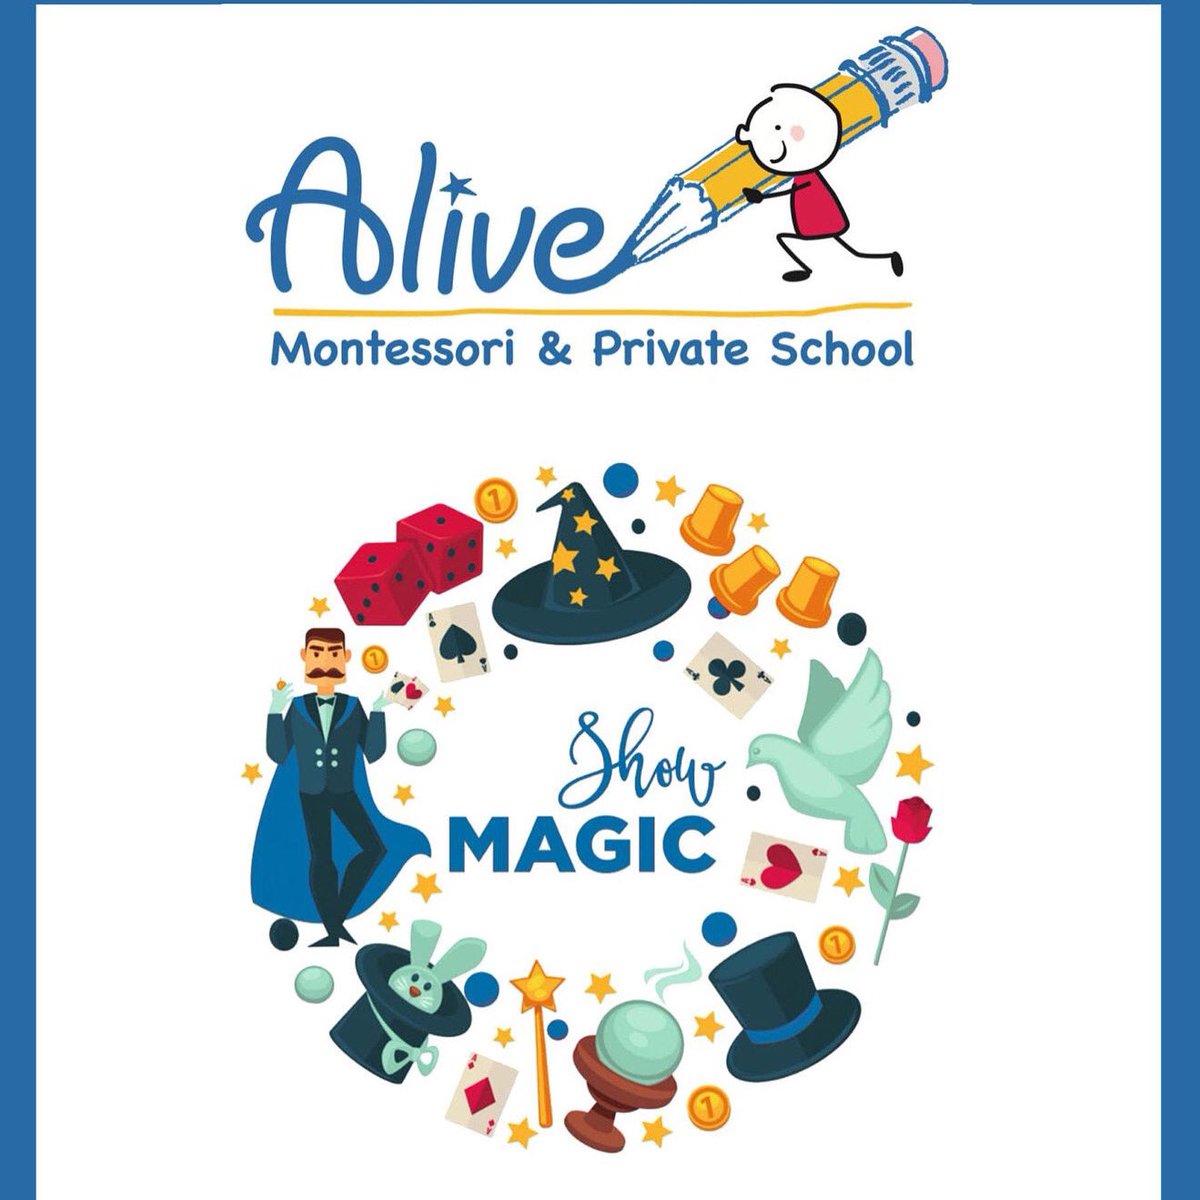 Free Online Magic Show to help kids smile, laugh, and be entertained at home. Please contact us for more information! 
#magicshow #alivemontessori #aliveprivateschool #montessoriprivateschool #privateschooltoronto #virtualmagicshow